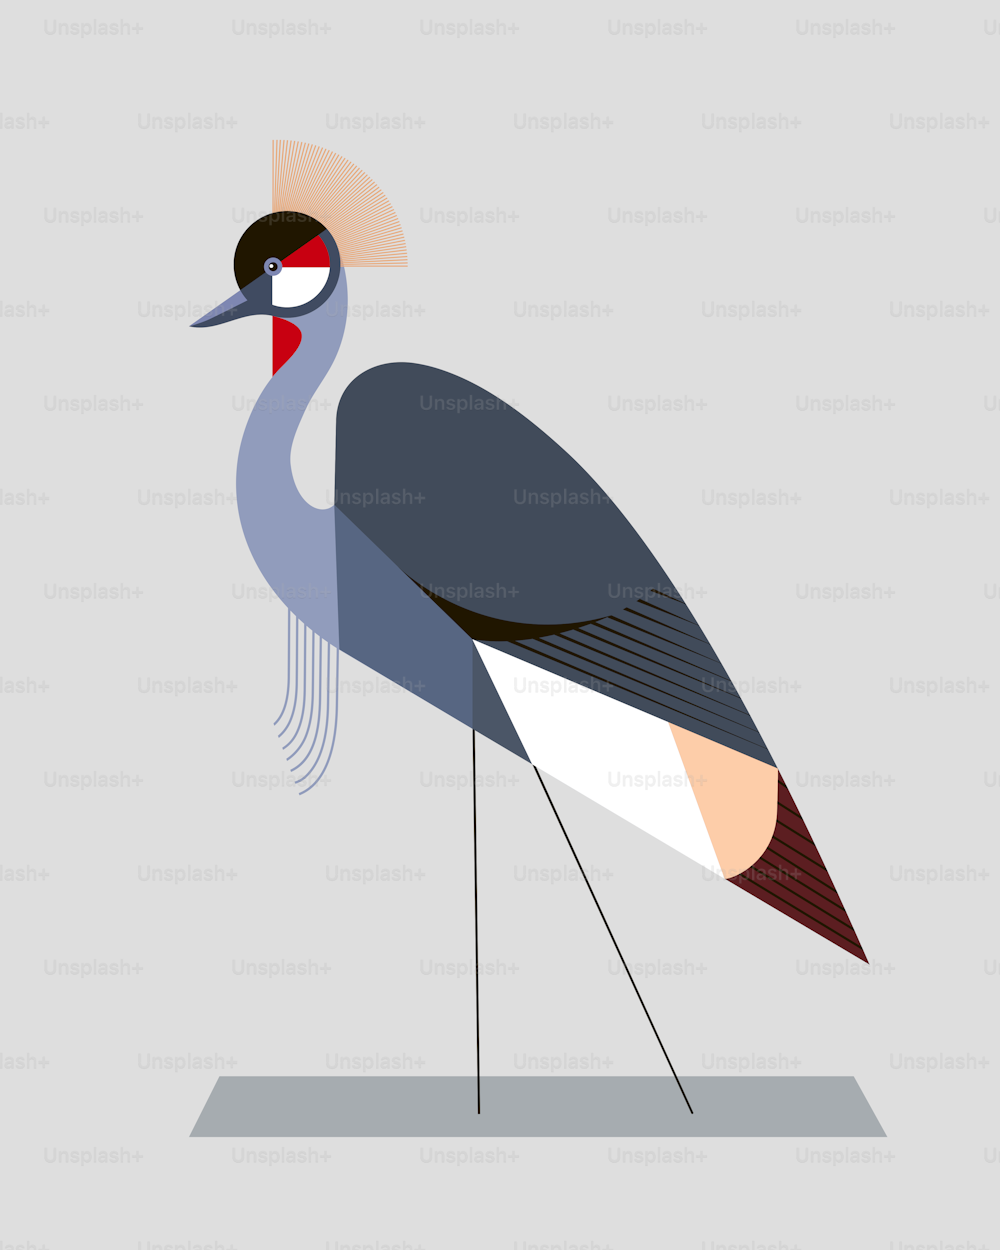 Image of a crowned crane in a geometric style on gray background